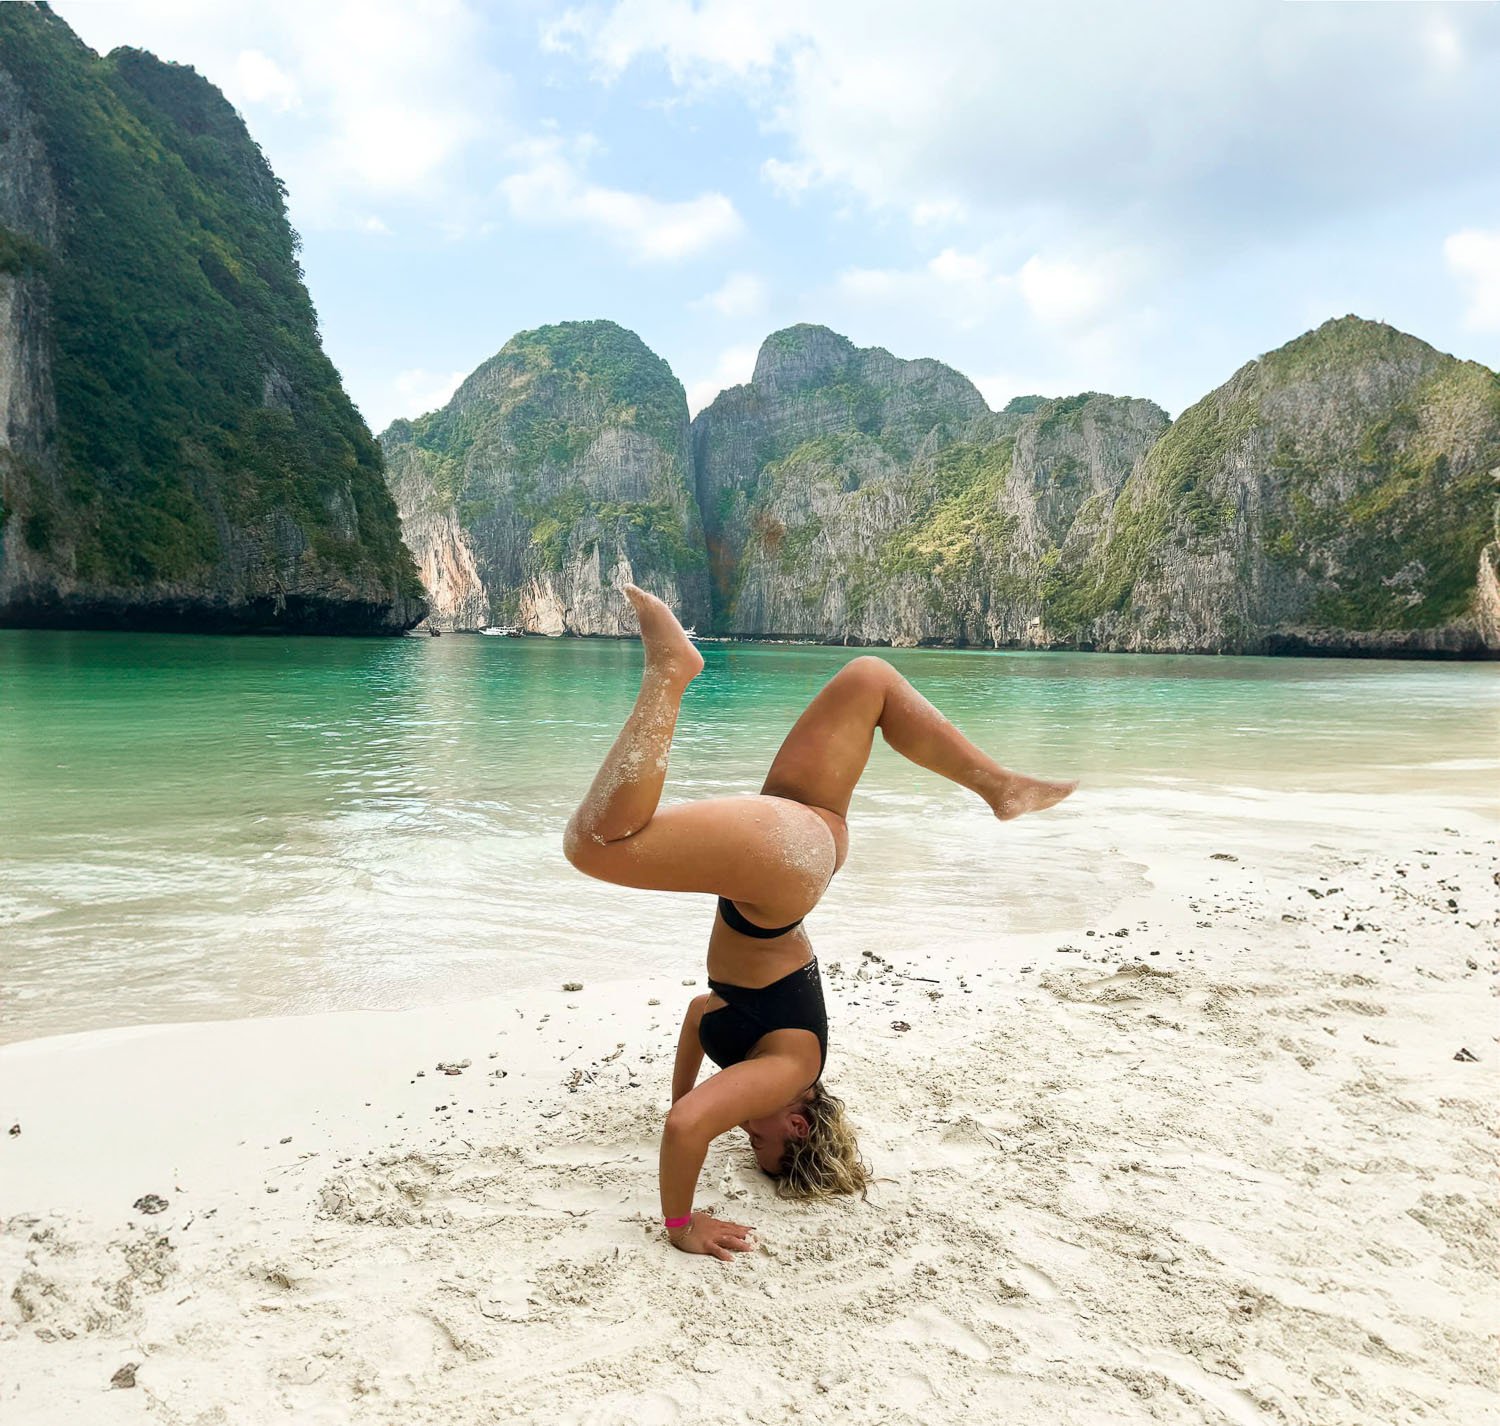 A woman doing a headstand on a beach